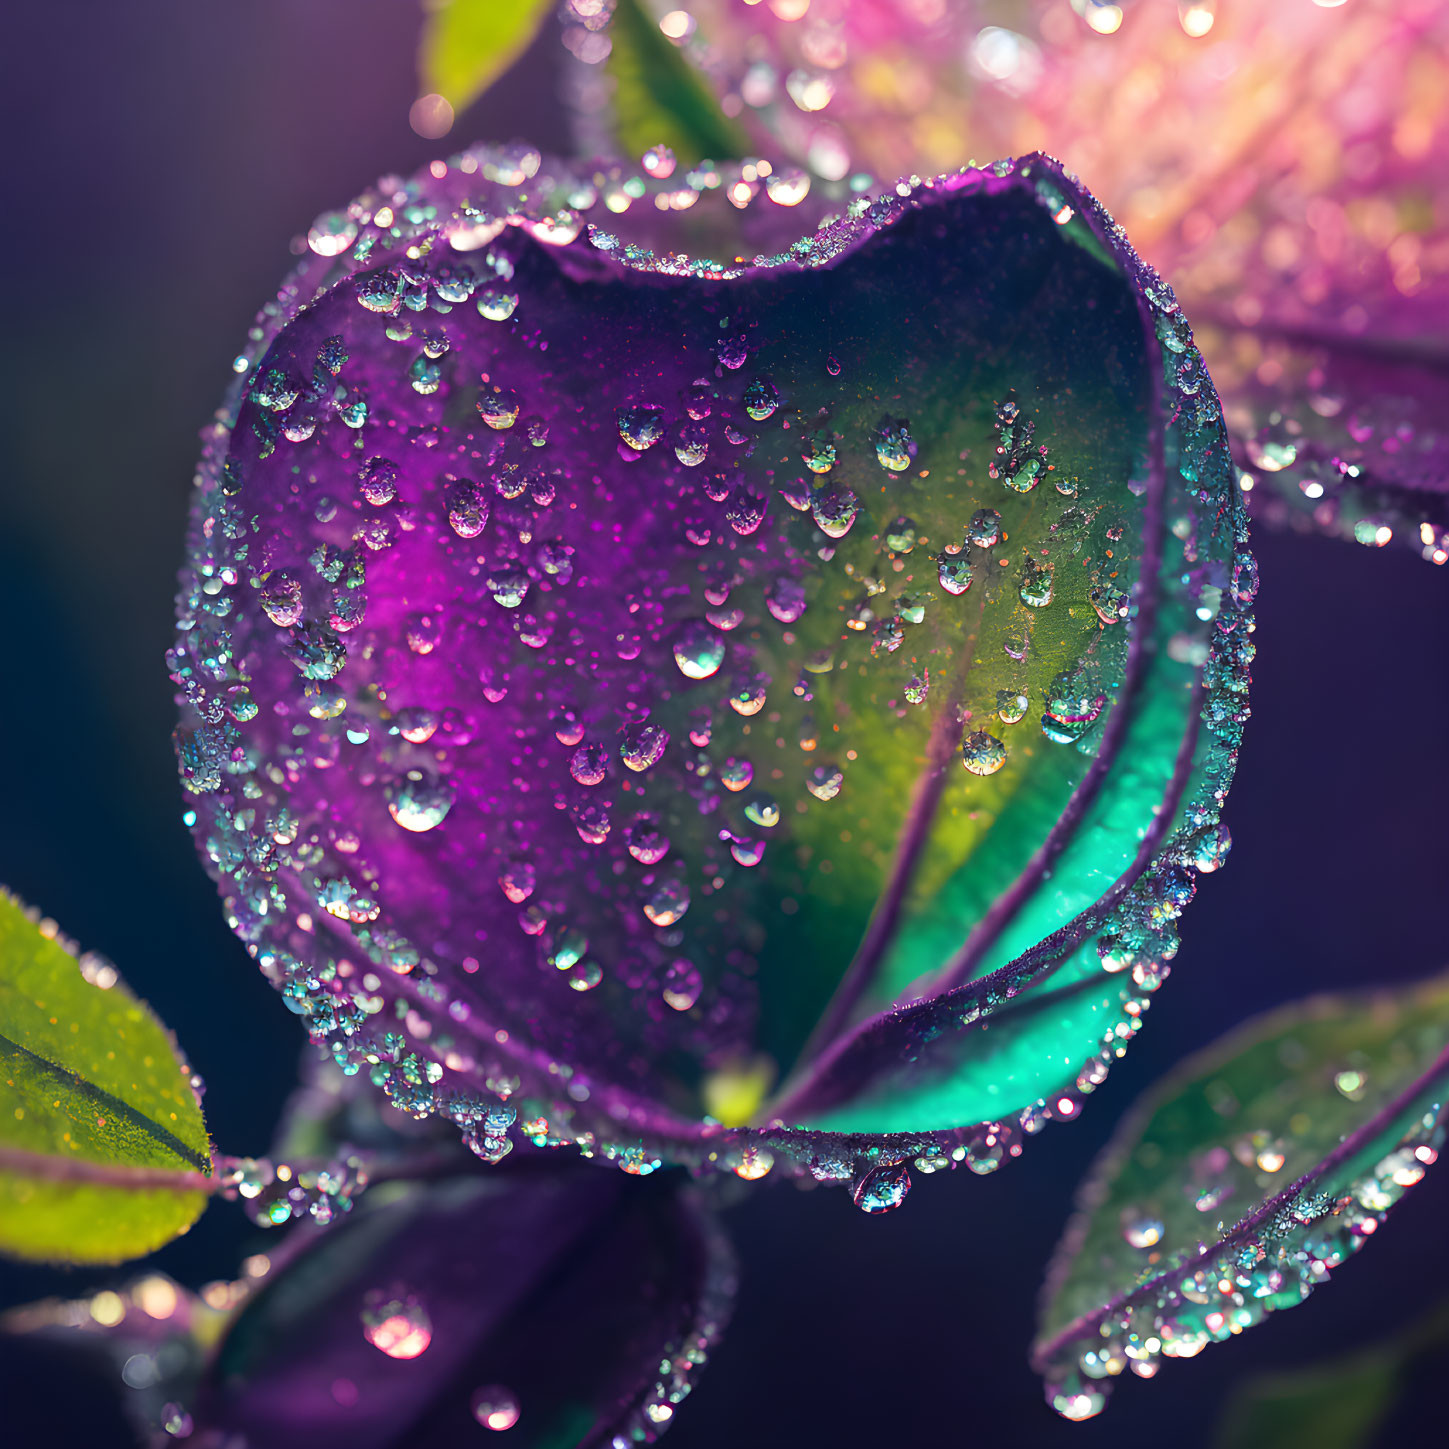 Vibrant purple leaf with sparkling dewdrops on bokeh background